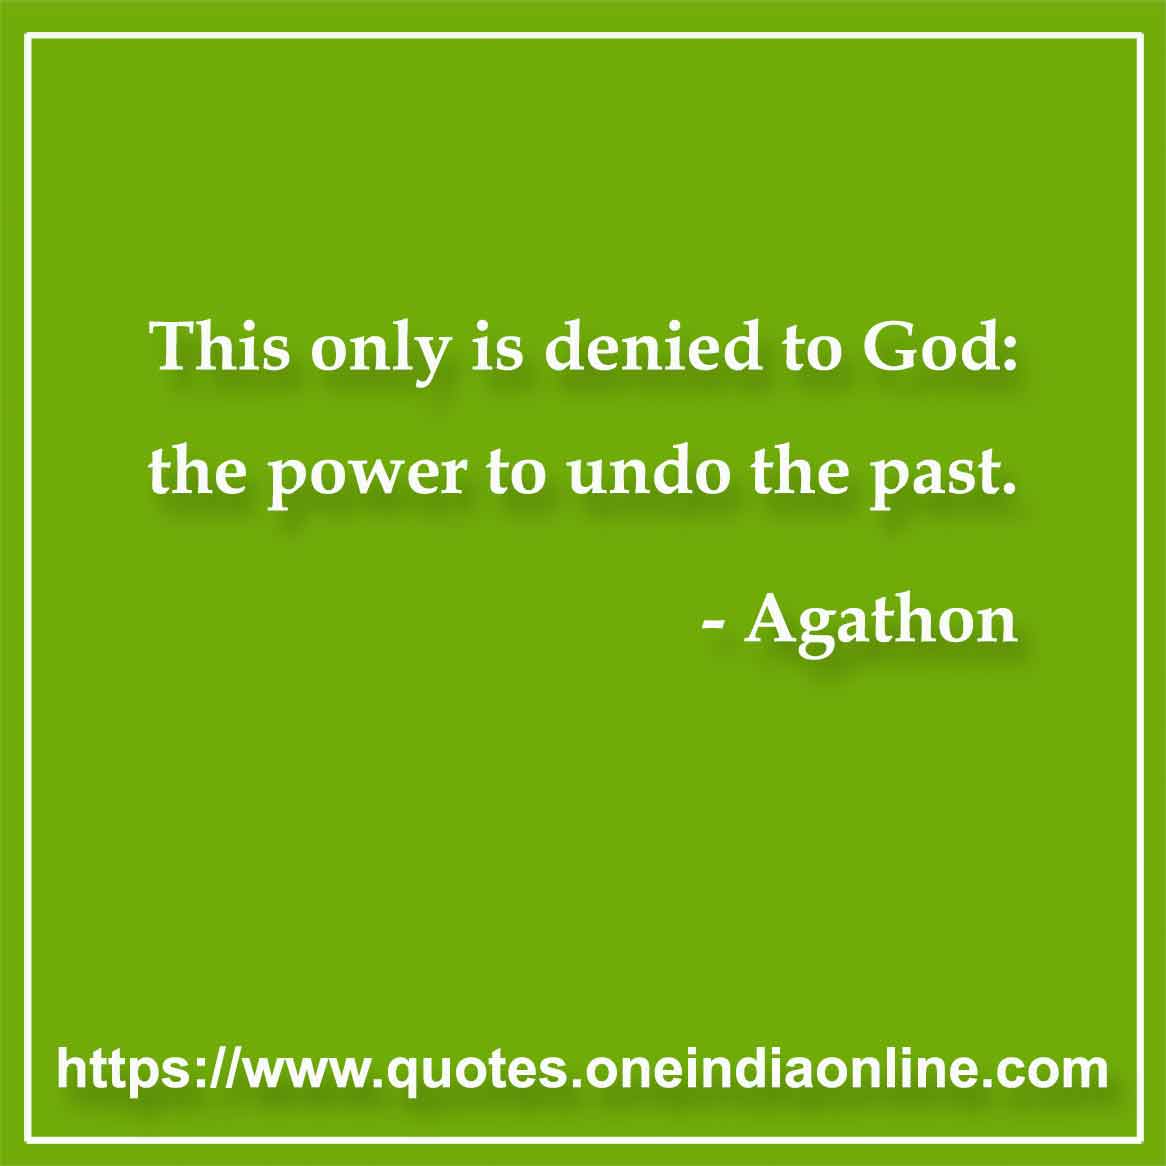 This only is denied to God: the power to undo the past.

- God Quotes by Agathon